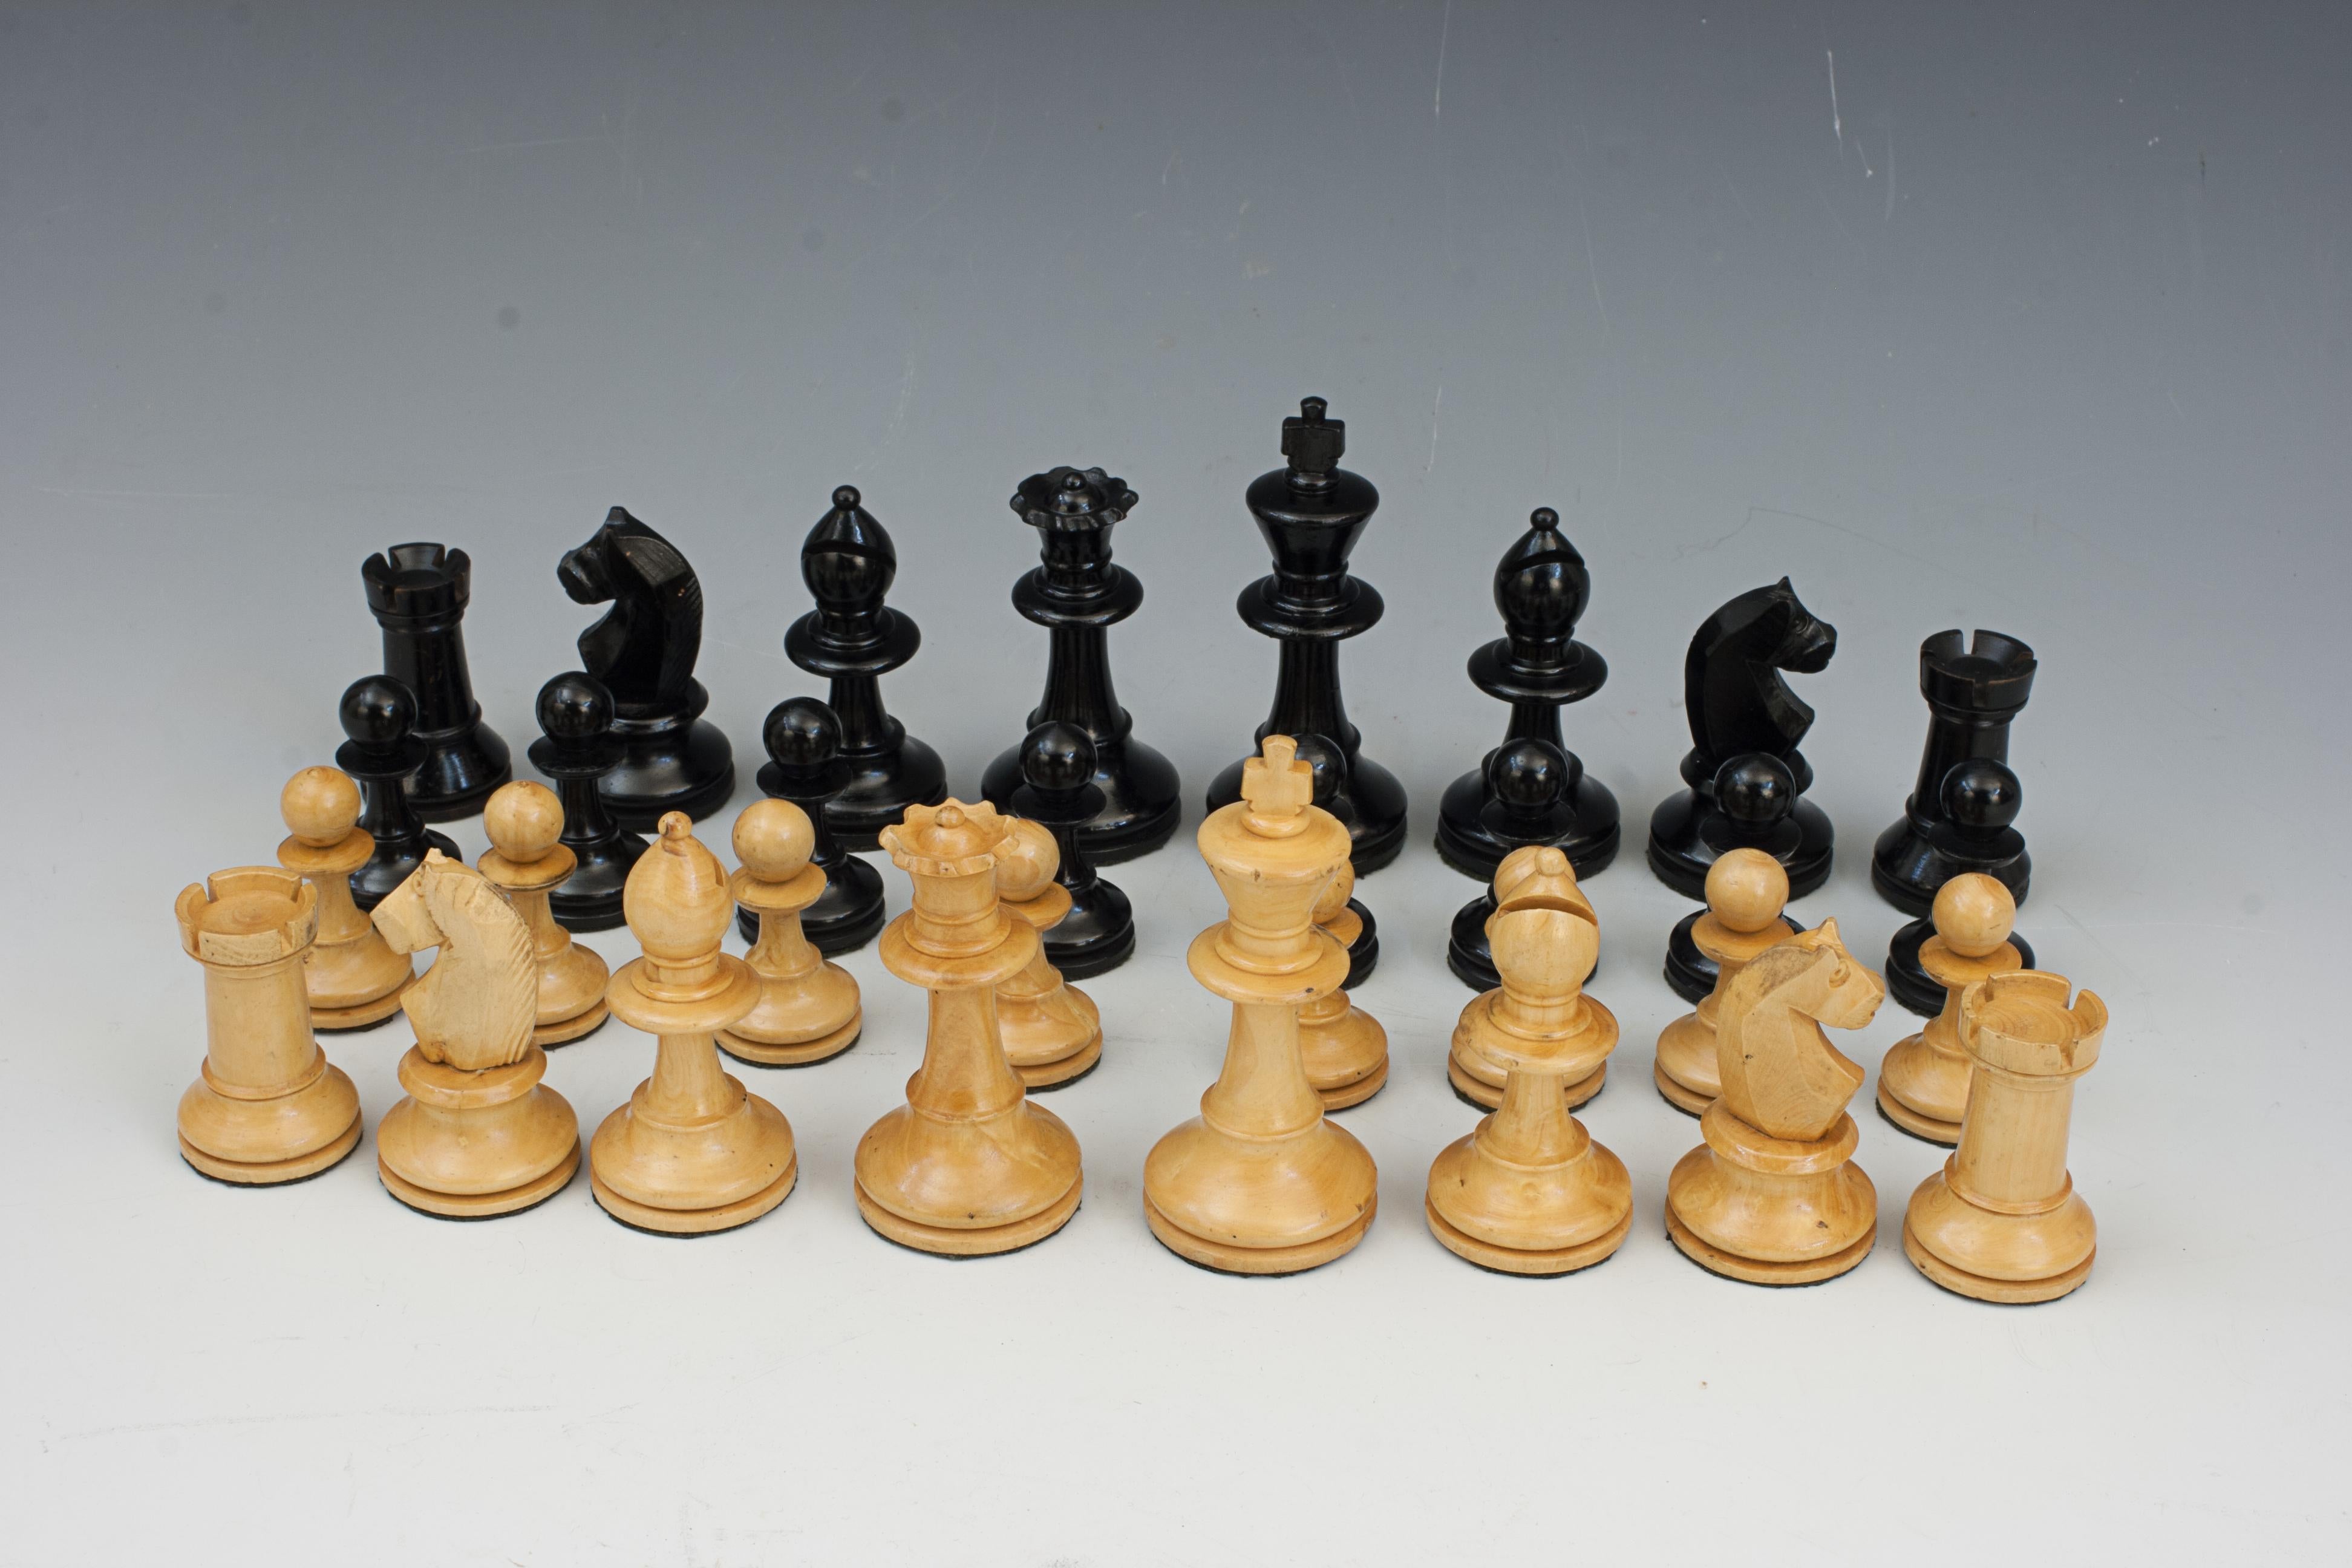 Antique Staunton Style Chess Figures.
A Staunton style chess set with wooden chess pieces with wide turned bases for added stability, and the underside of each piece being covered with felt allowing the pieces to slide more easily across the chess